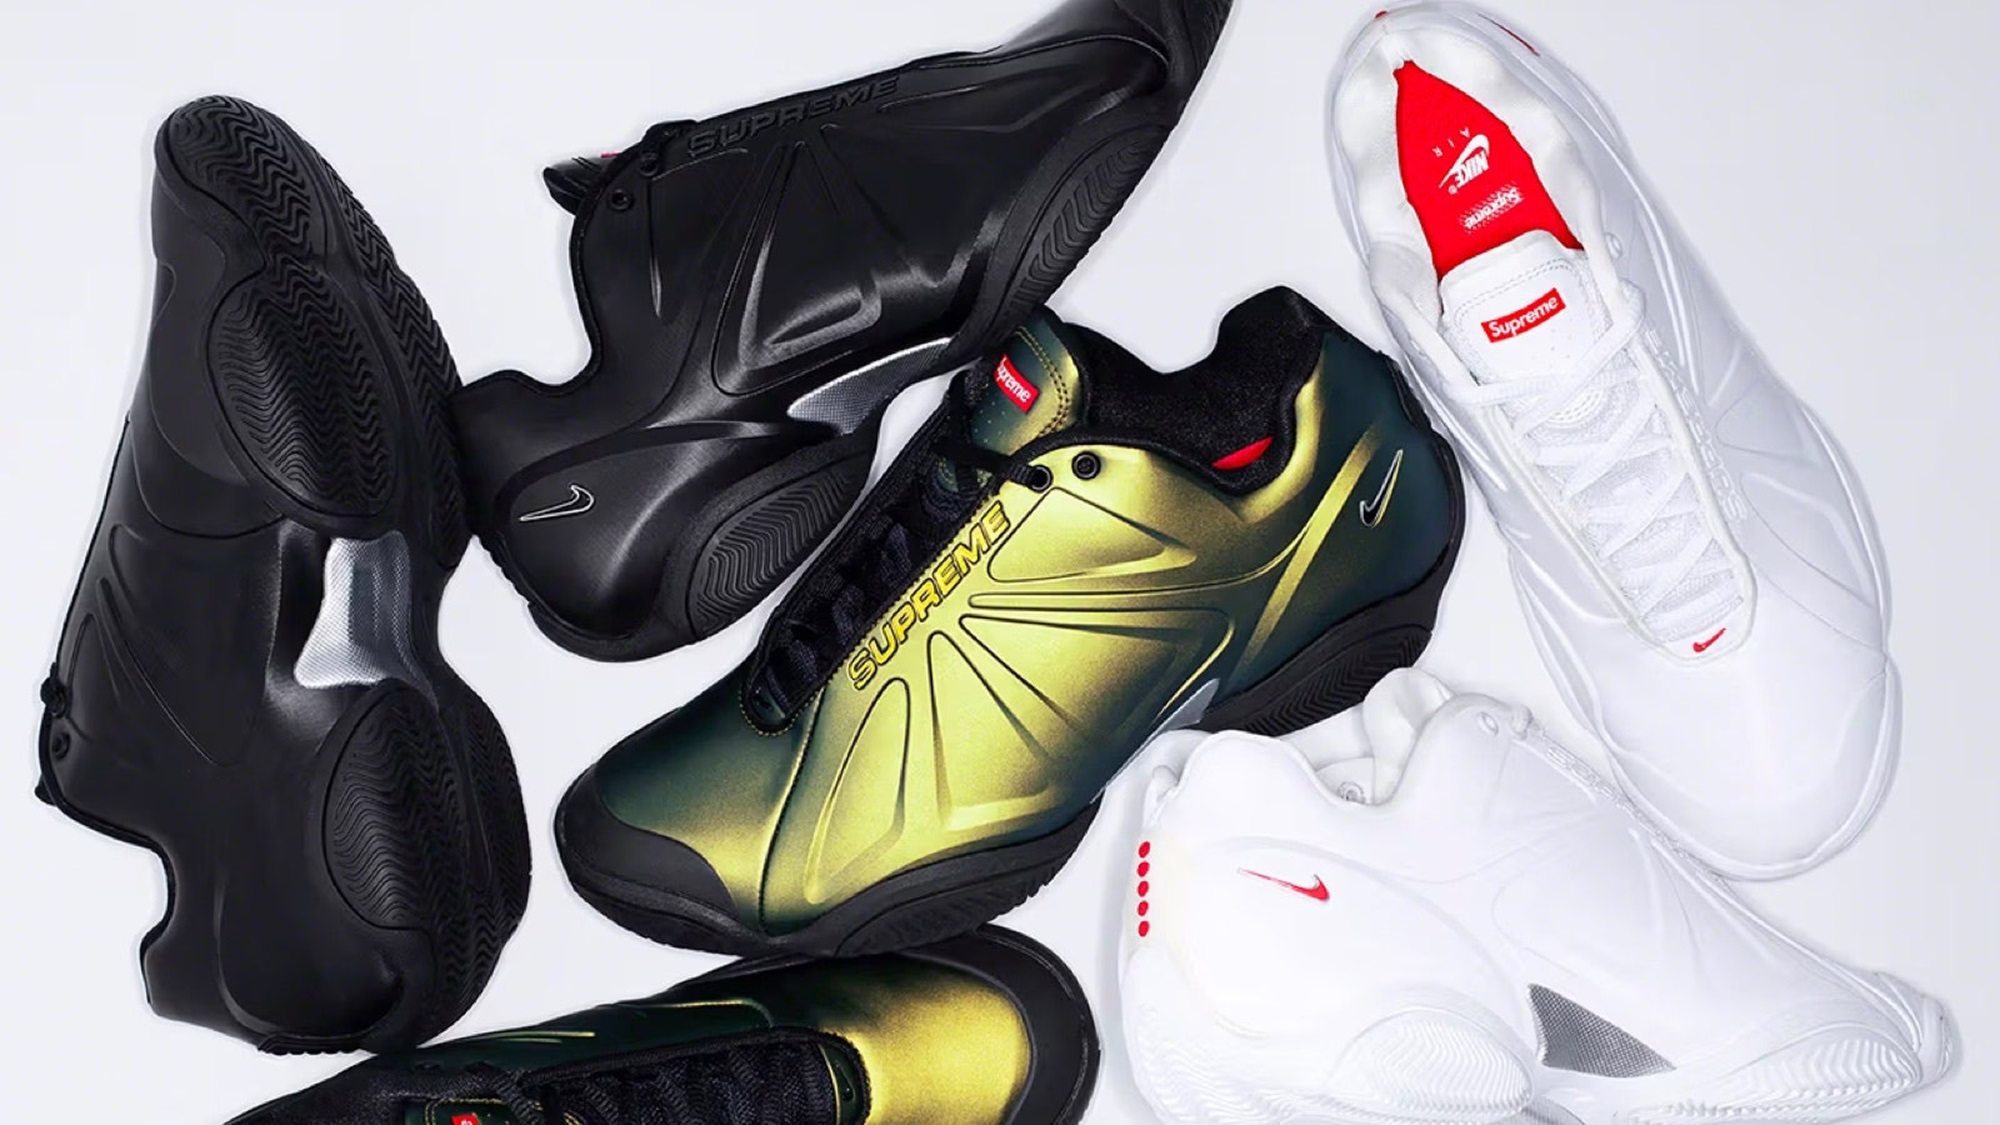 Nike x Supreme new Courtposite sneakers